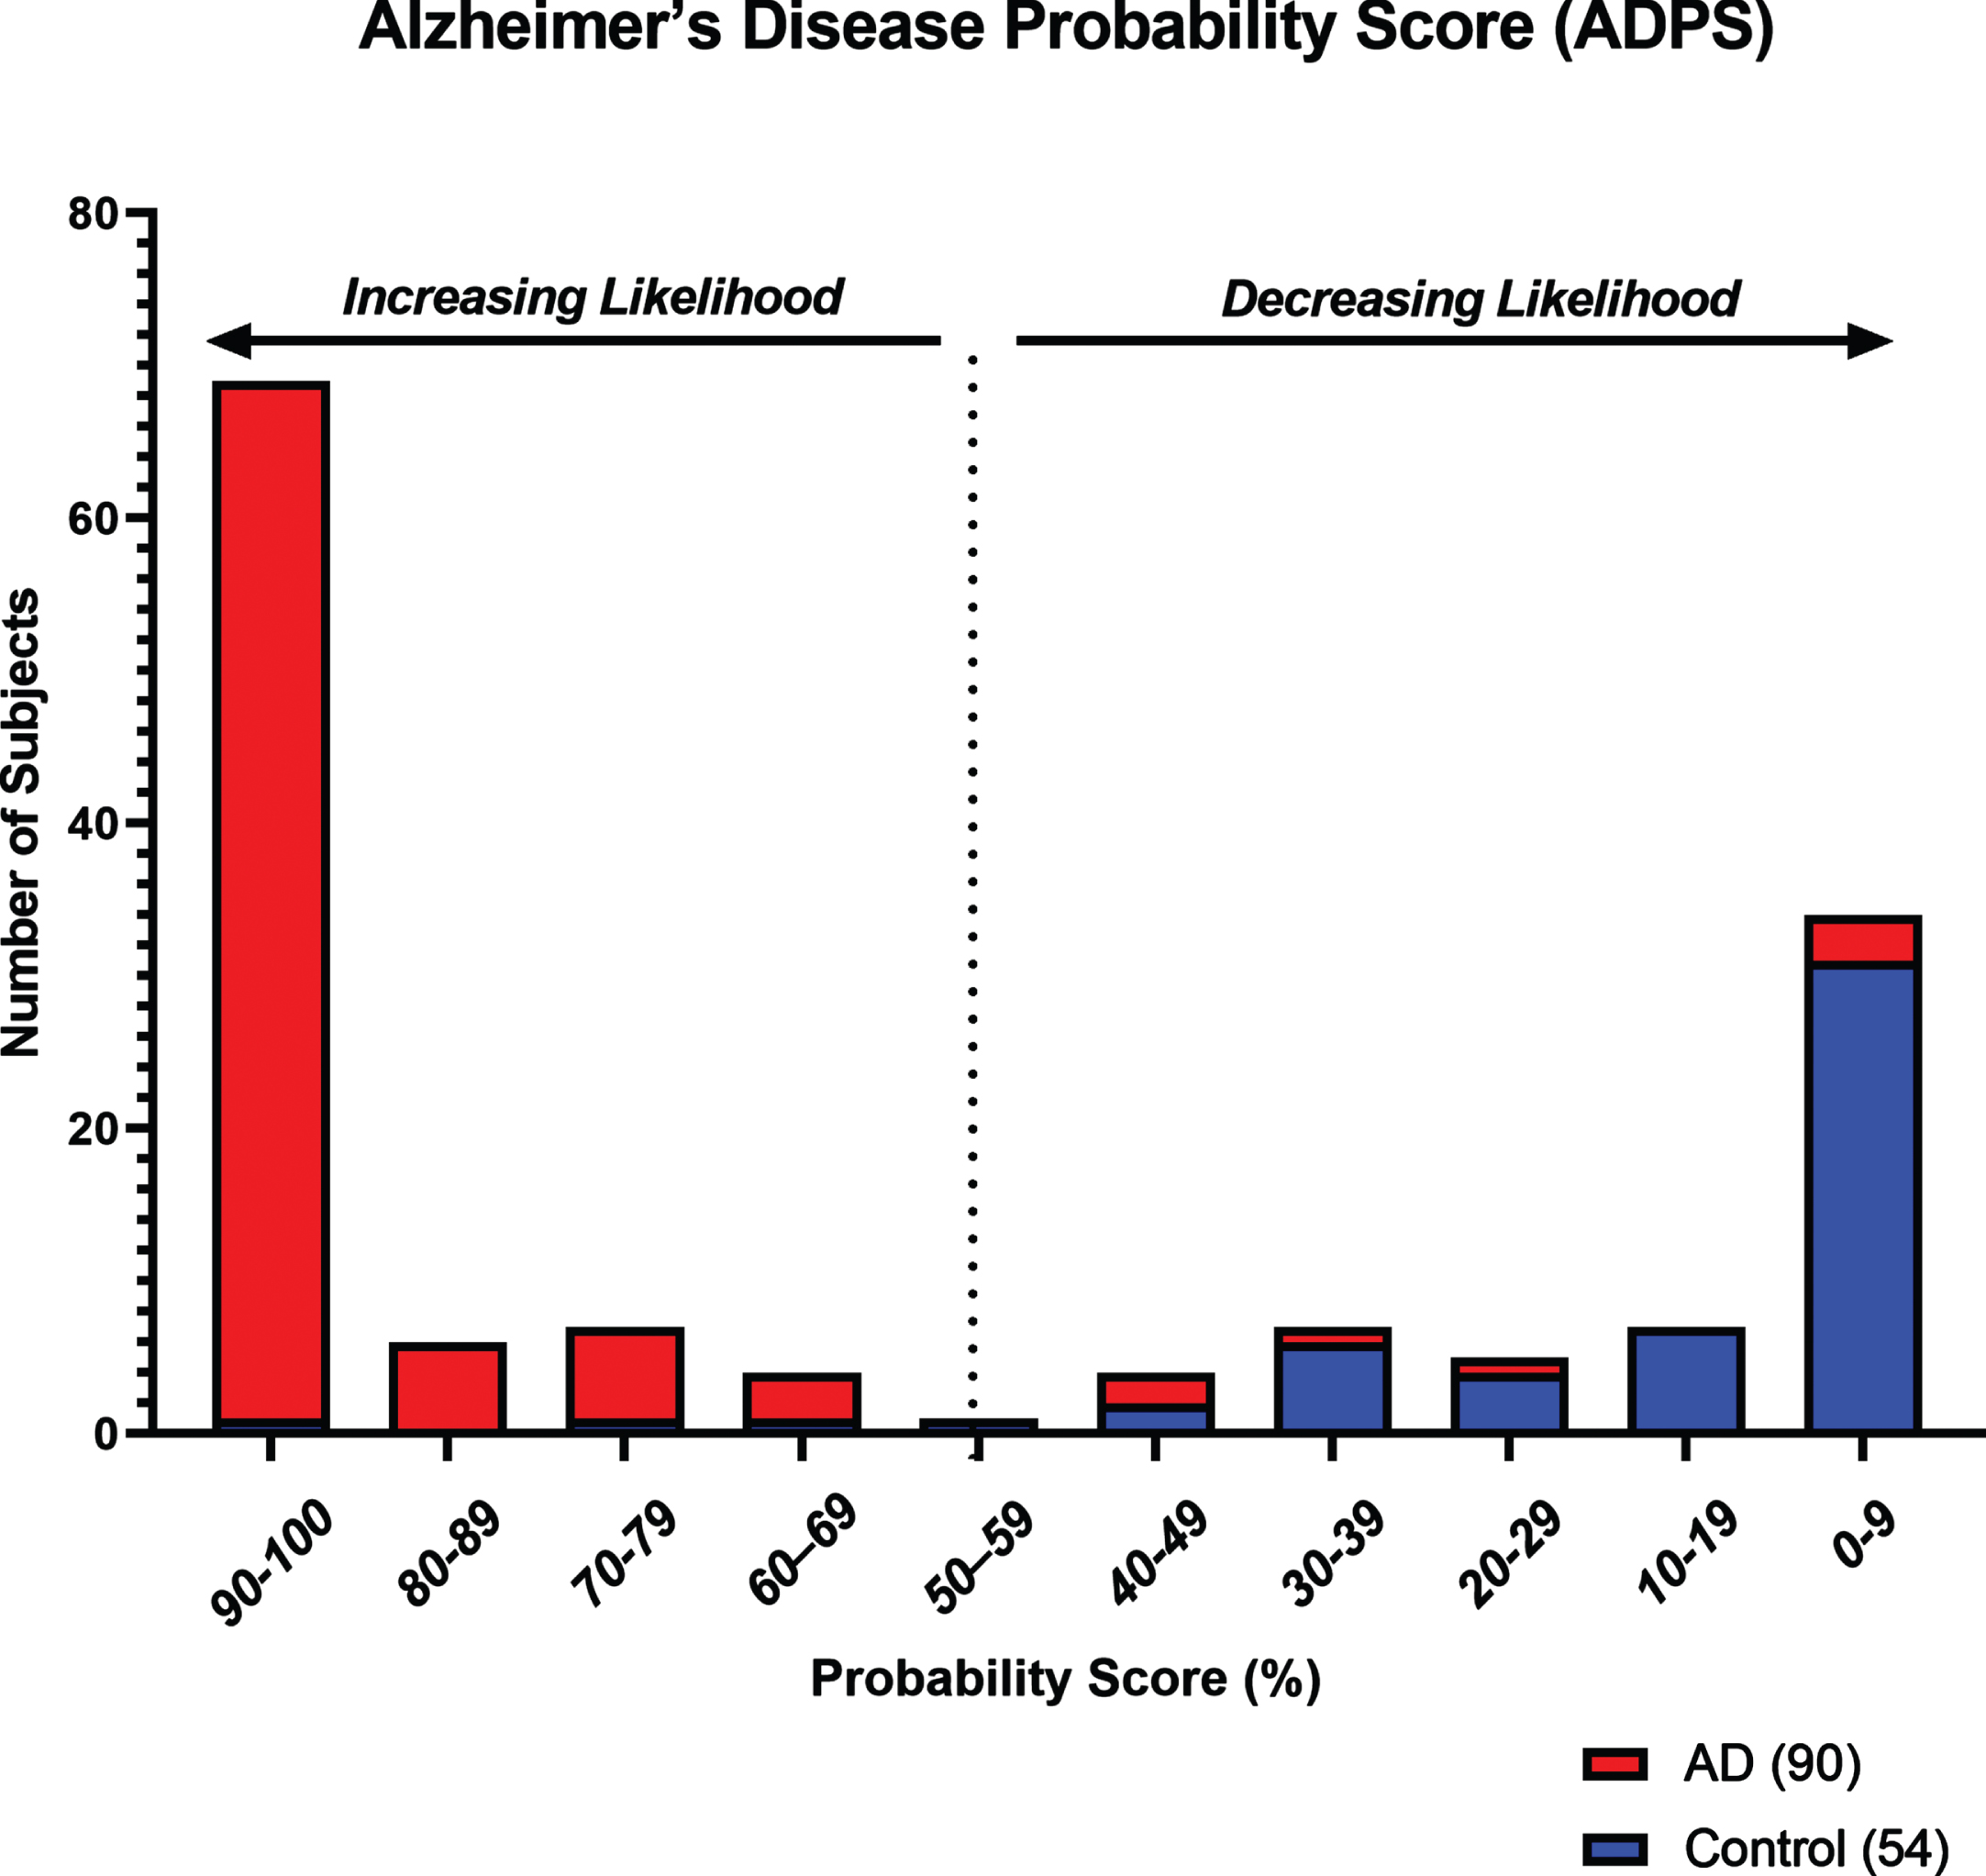 Histogram showing the distribution of Alzheimer’s Disease Probability Scores (ADPS) in Testing Set subjects (n = 144) for increasing or decreasing likelihood of the presence of AD-related pathology. Based on a scale of 0–100, a score of 56 or greater indicates a higher likelihood of the presence of AD-related pathology, while a score of 55 or lower indicates a reduced likelihood.